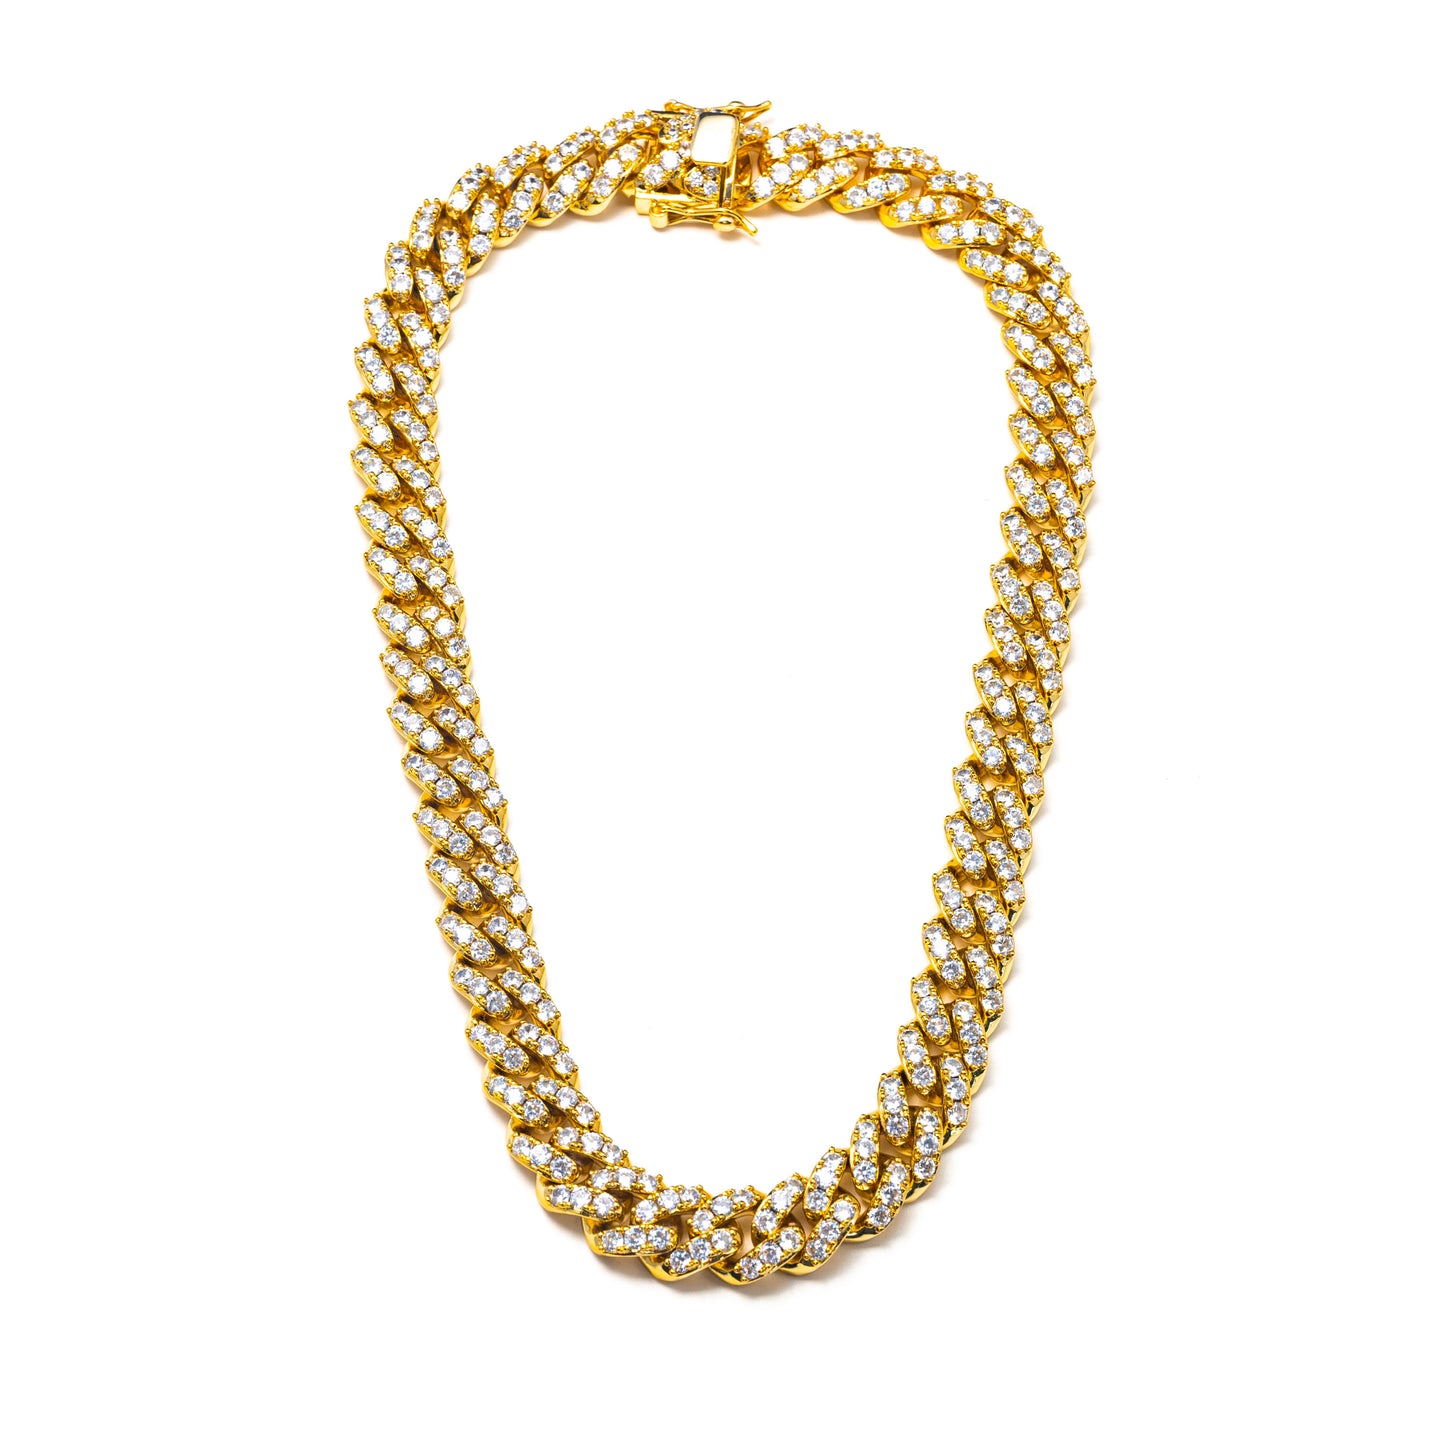 CLASSIC ICY CUBAN LINK NECKLACE